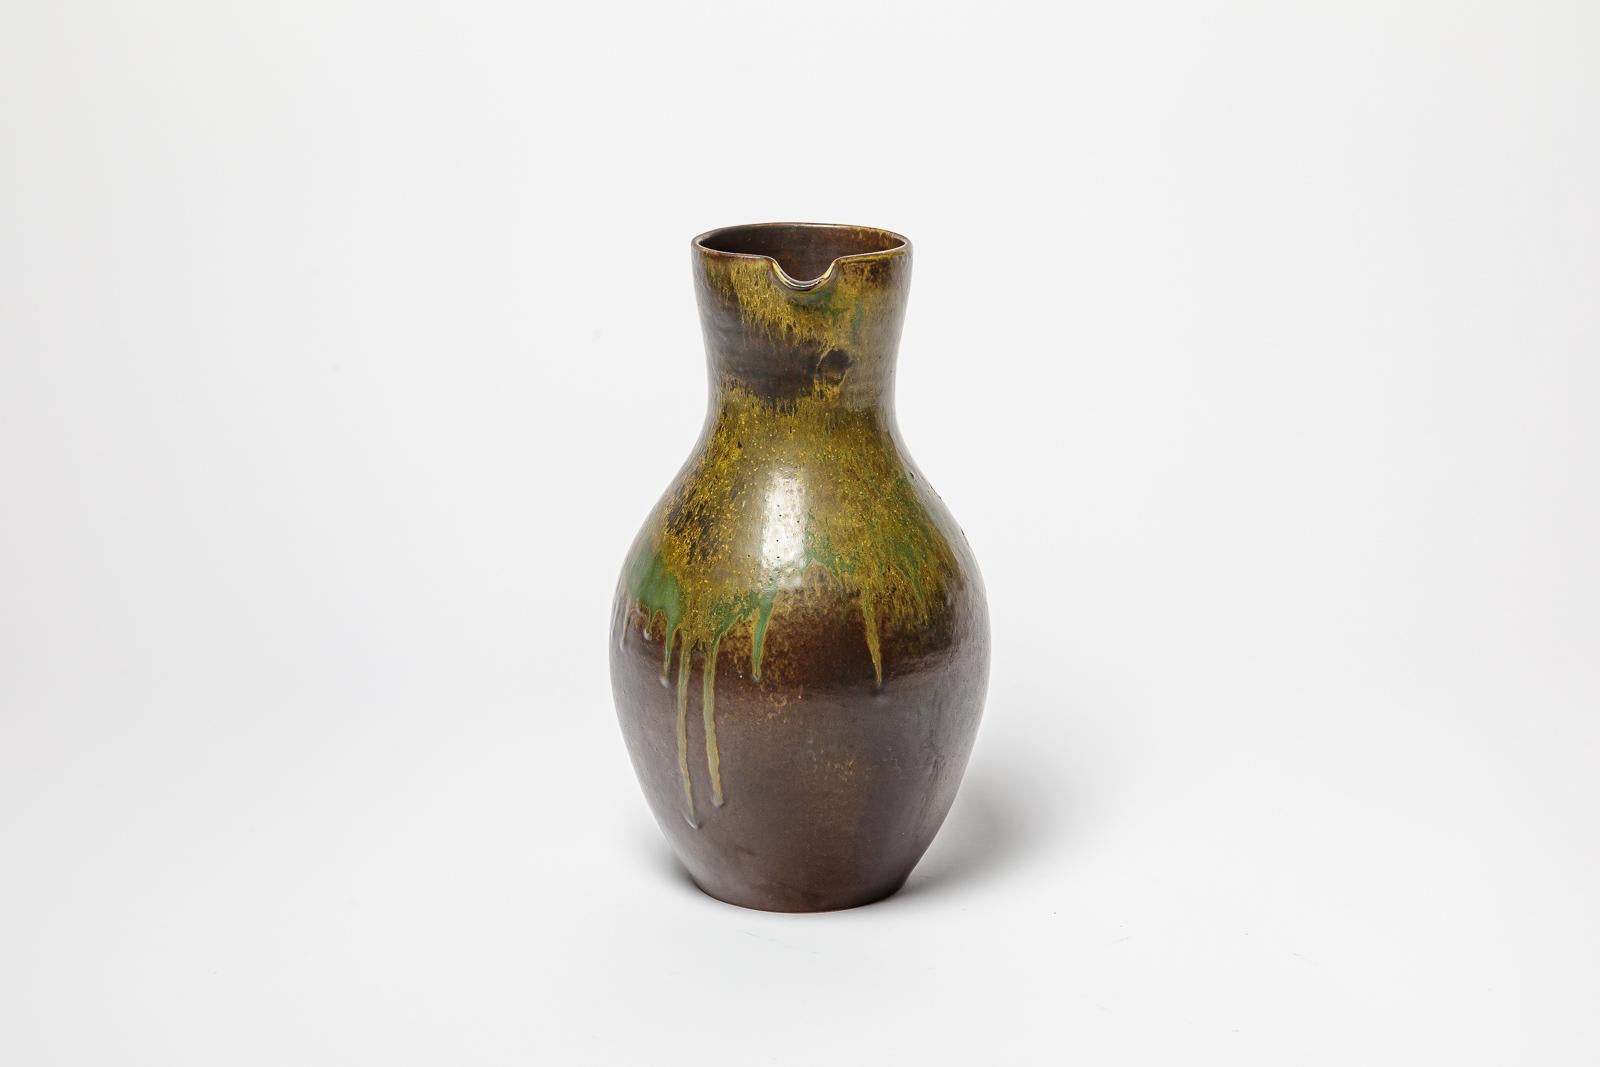 Beaux Arts Brown and green glazed ceramic pitcher by Roger Jacques, circa 1960-1970. For Sale